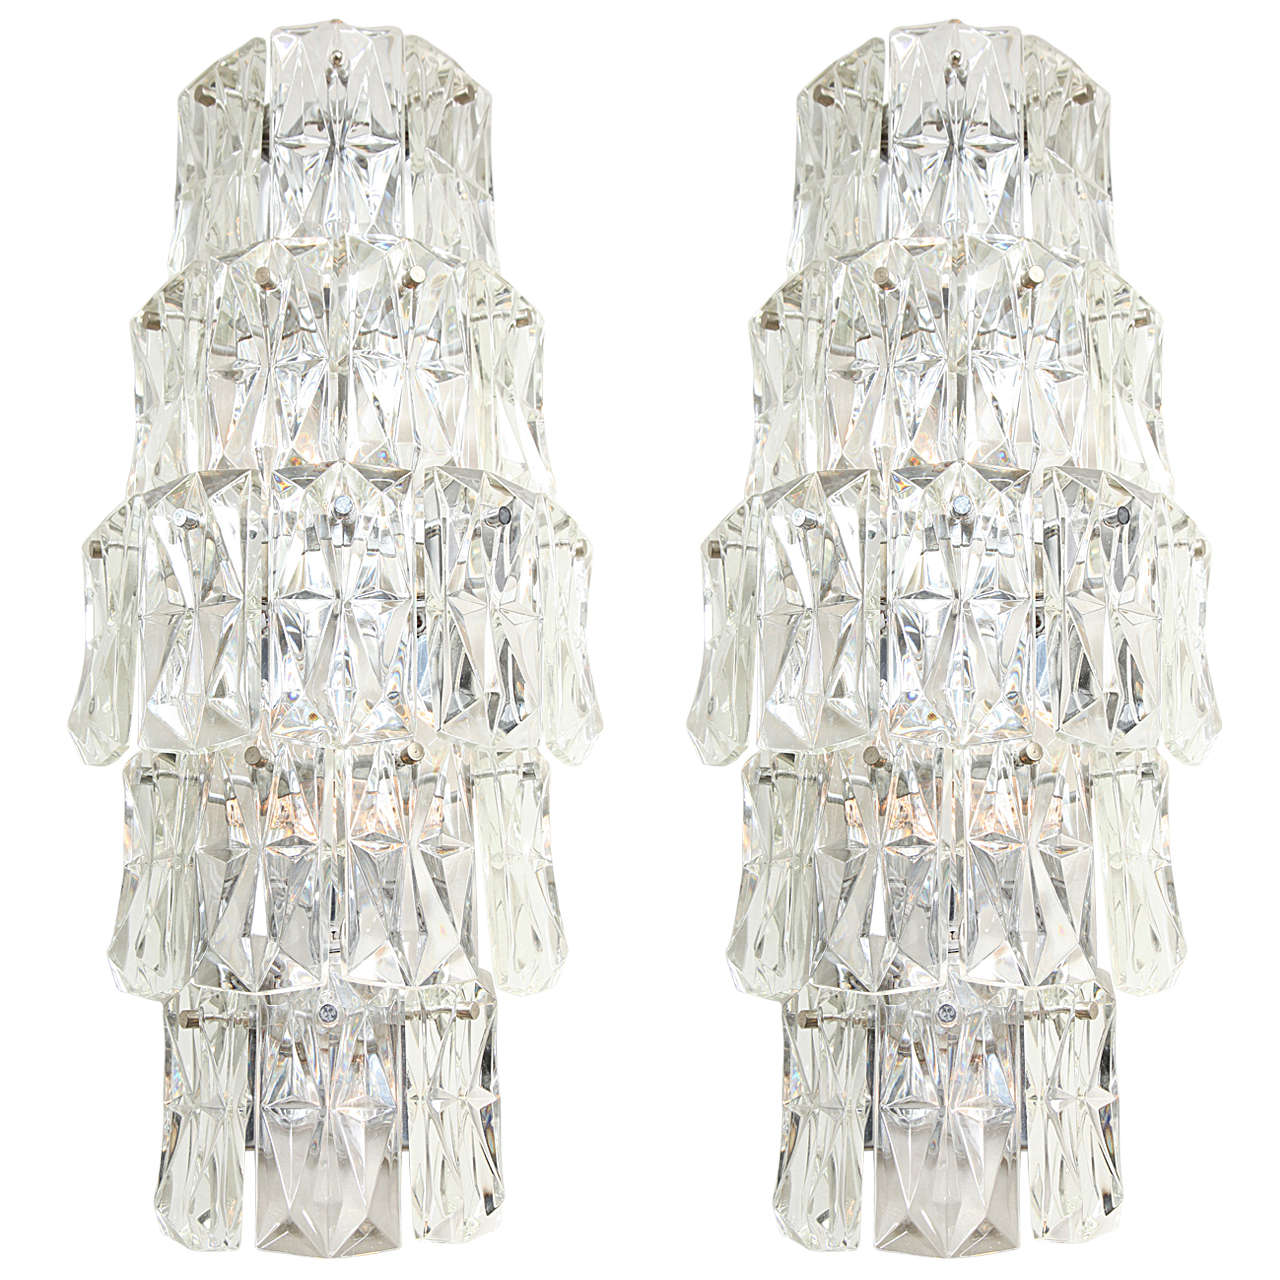 Pair of Contemporary Oversized Crystal Sconces